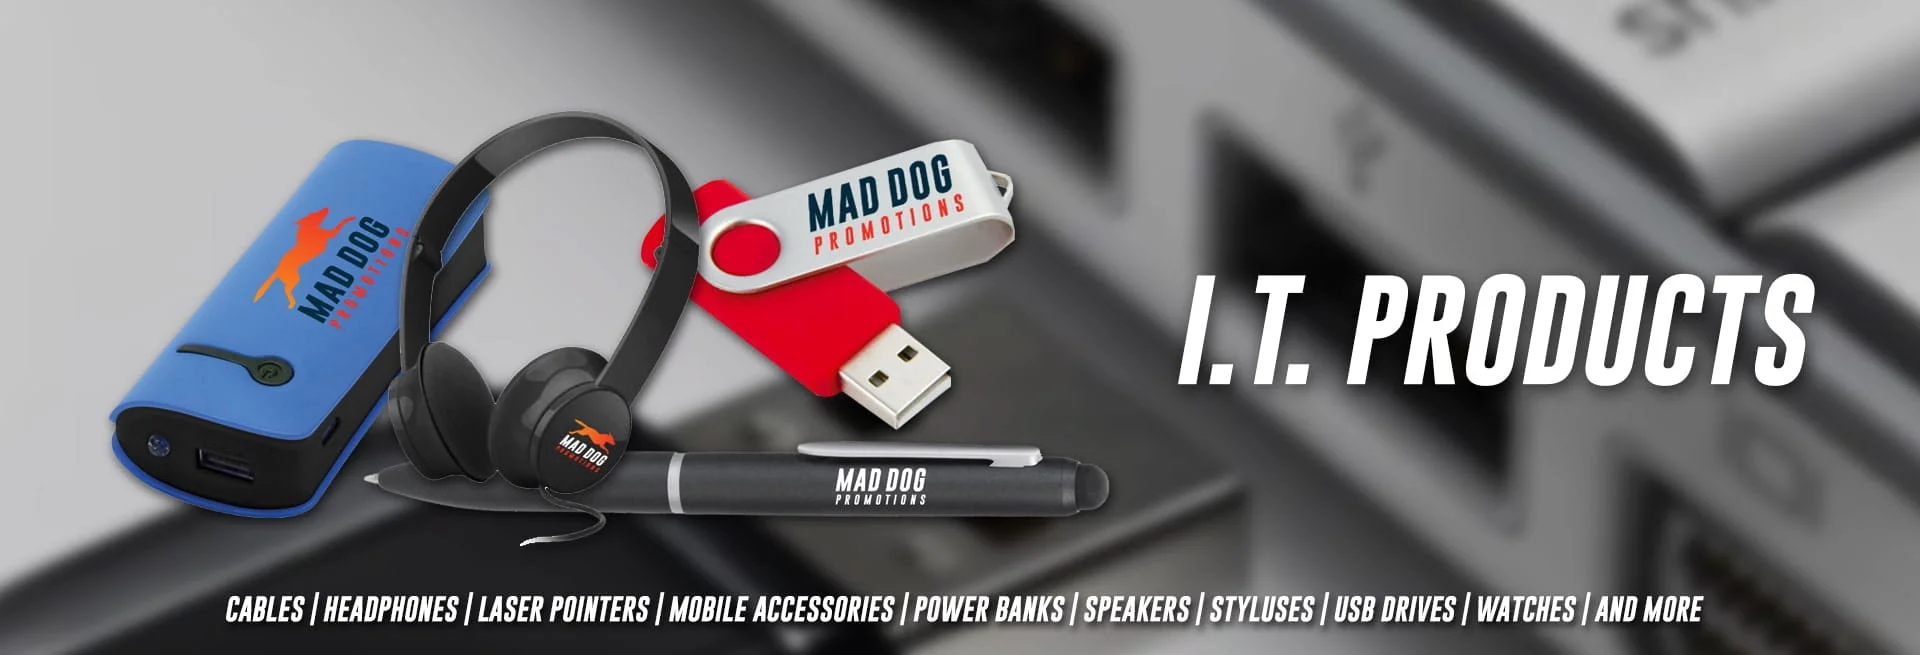 IT Products - Mad Dog Promotions